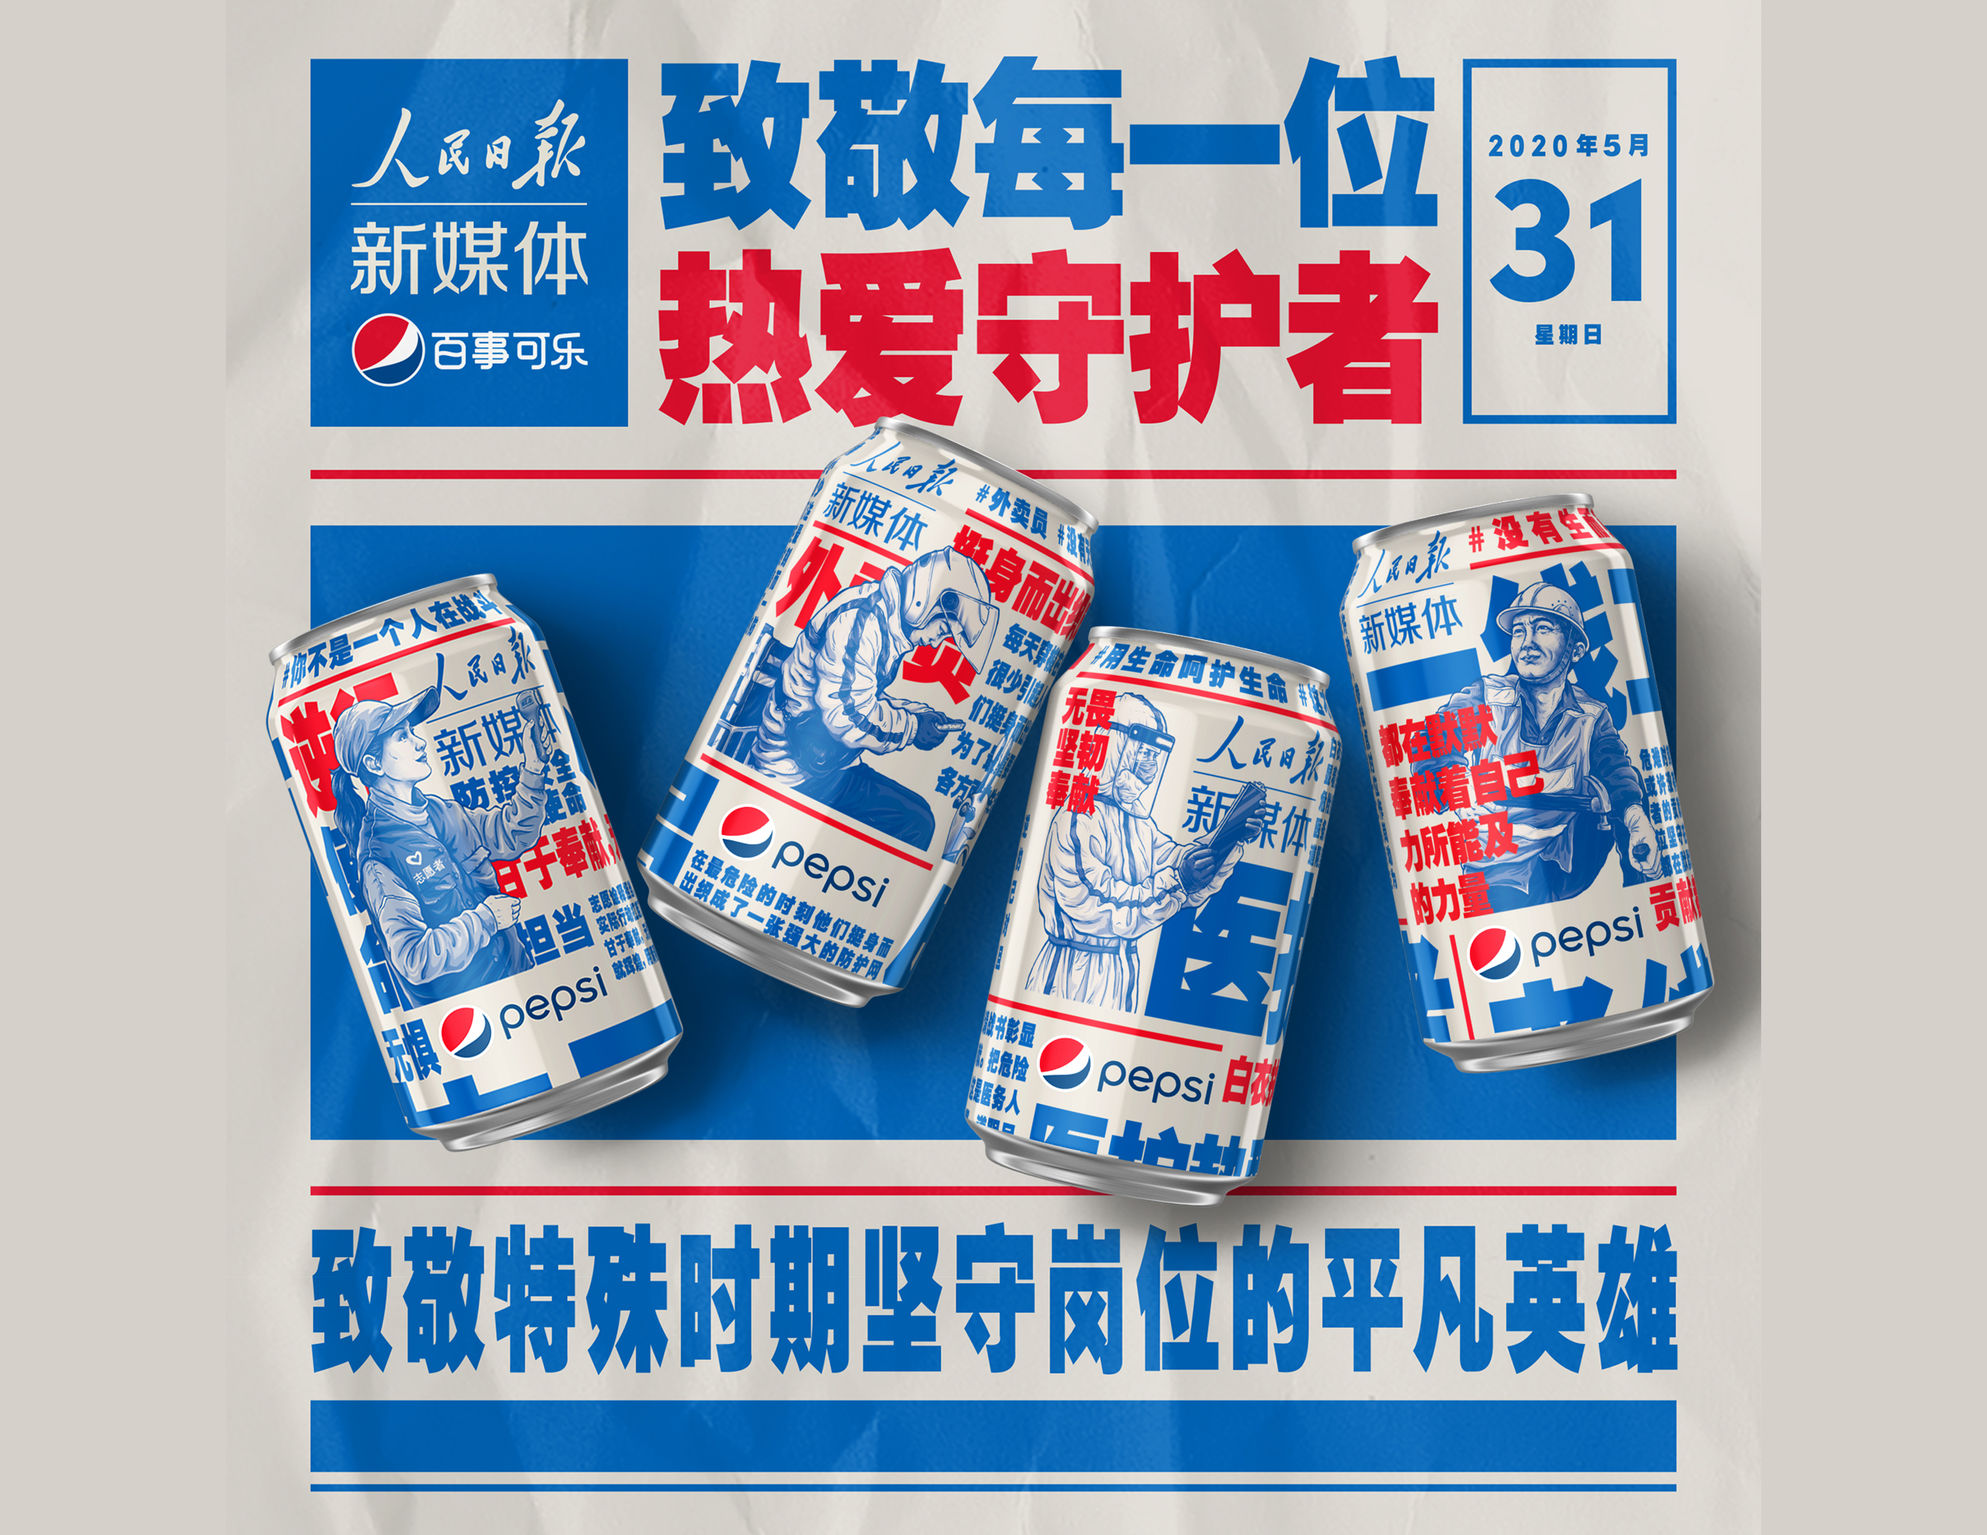 Pepsi x China's People's Daily New Media (GCR)